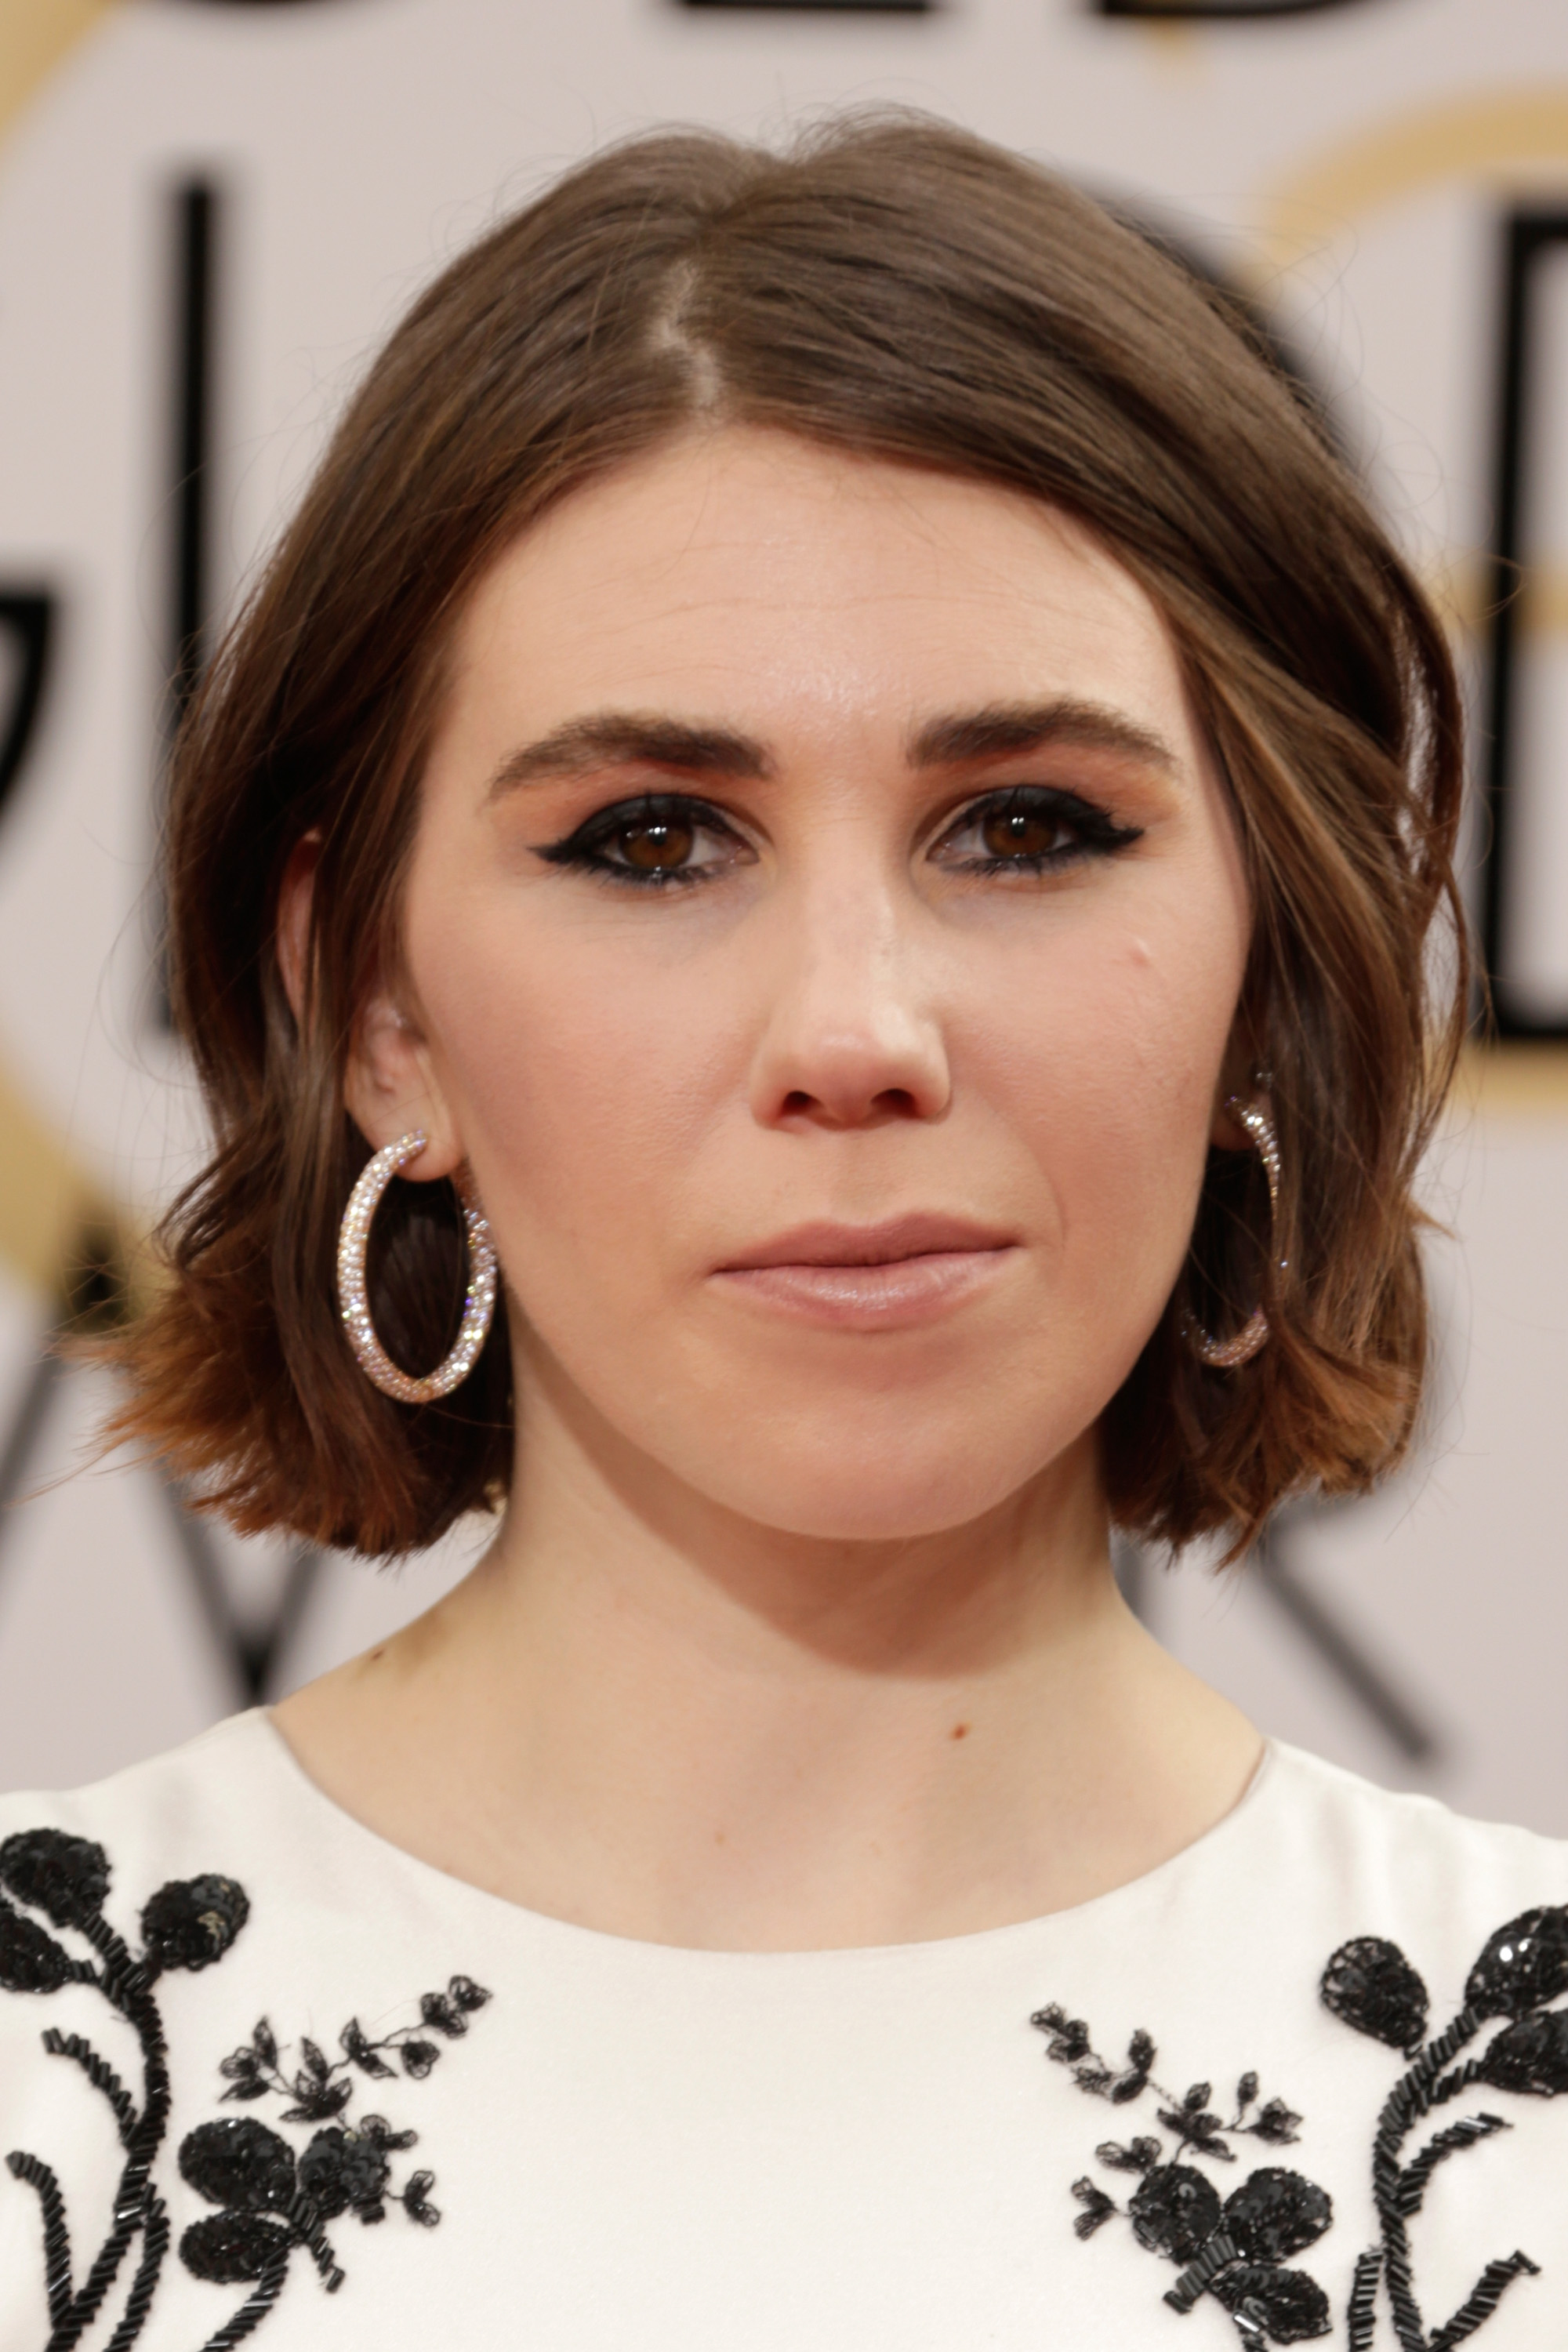 Zosia Mamet attends the 71st Annual Golden Globe Awards on January 12, 2014 in Beverly Hills, California. (Jeff Vespa—WireImage)